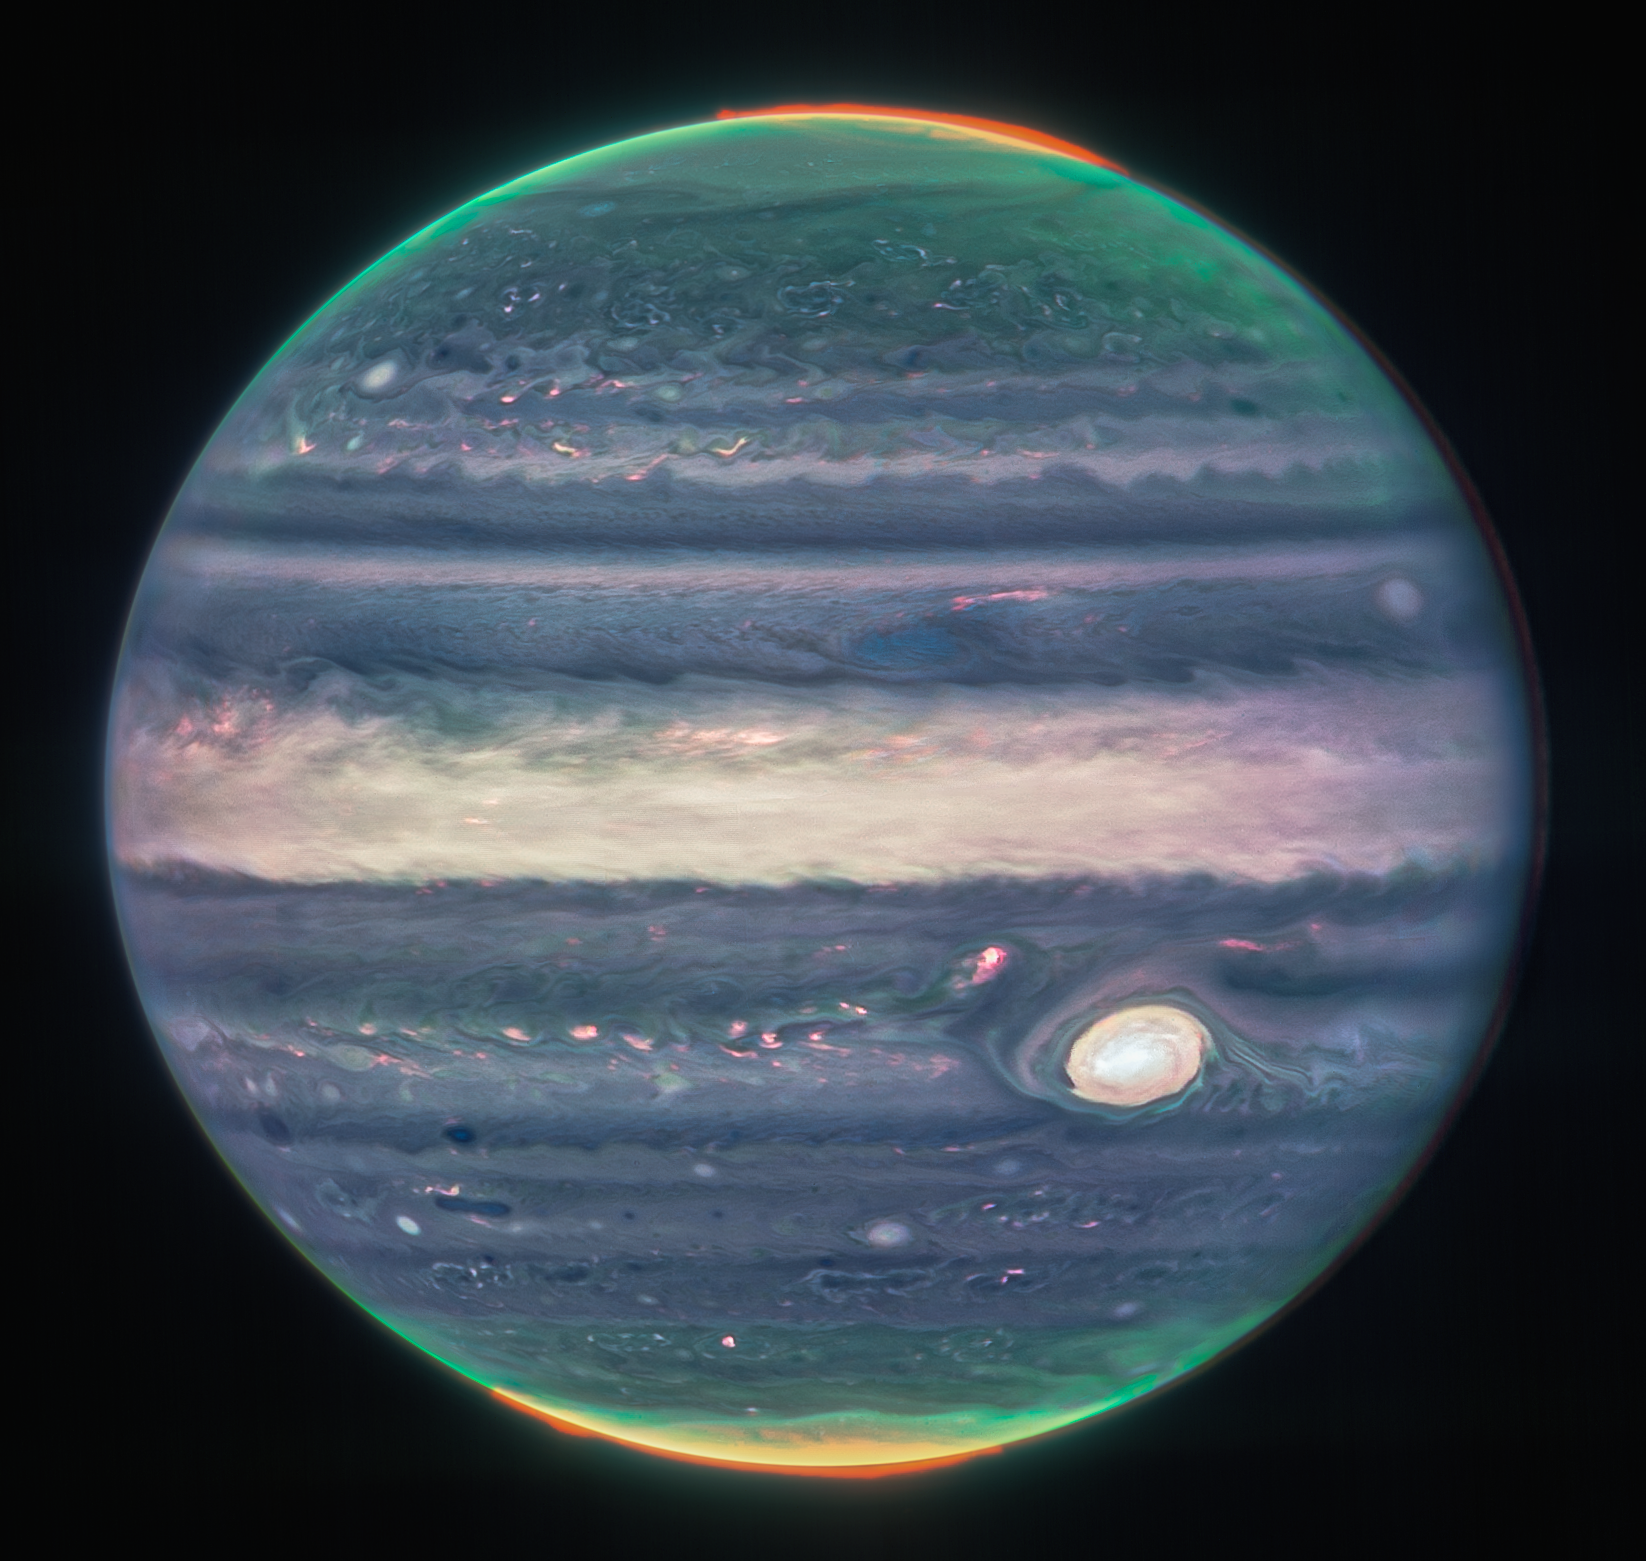 A composite image of Jupiter from three filters – F360M (red), F212N (yellow-green), and F150W2 (cyan).